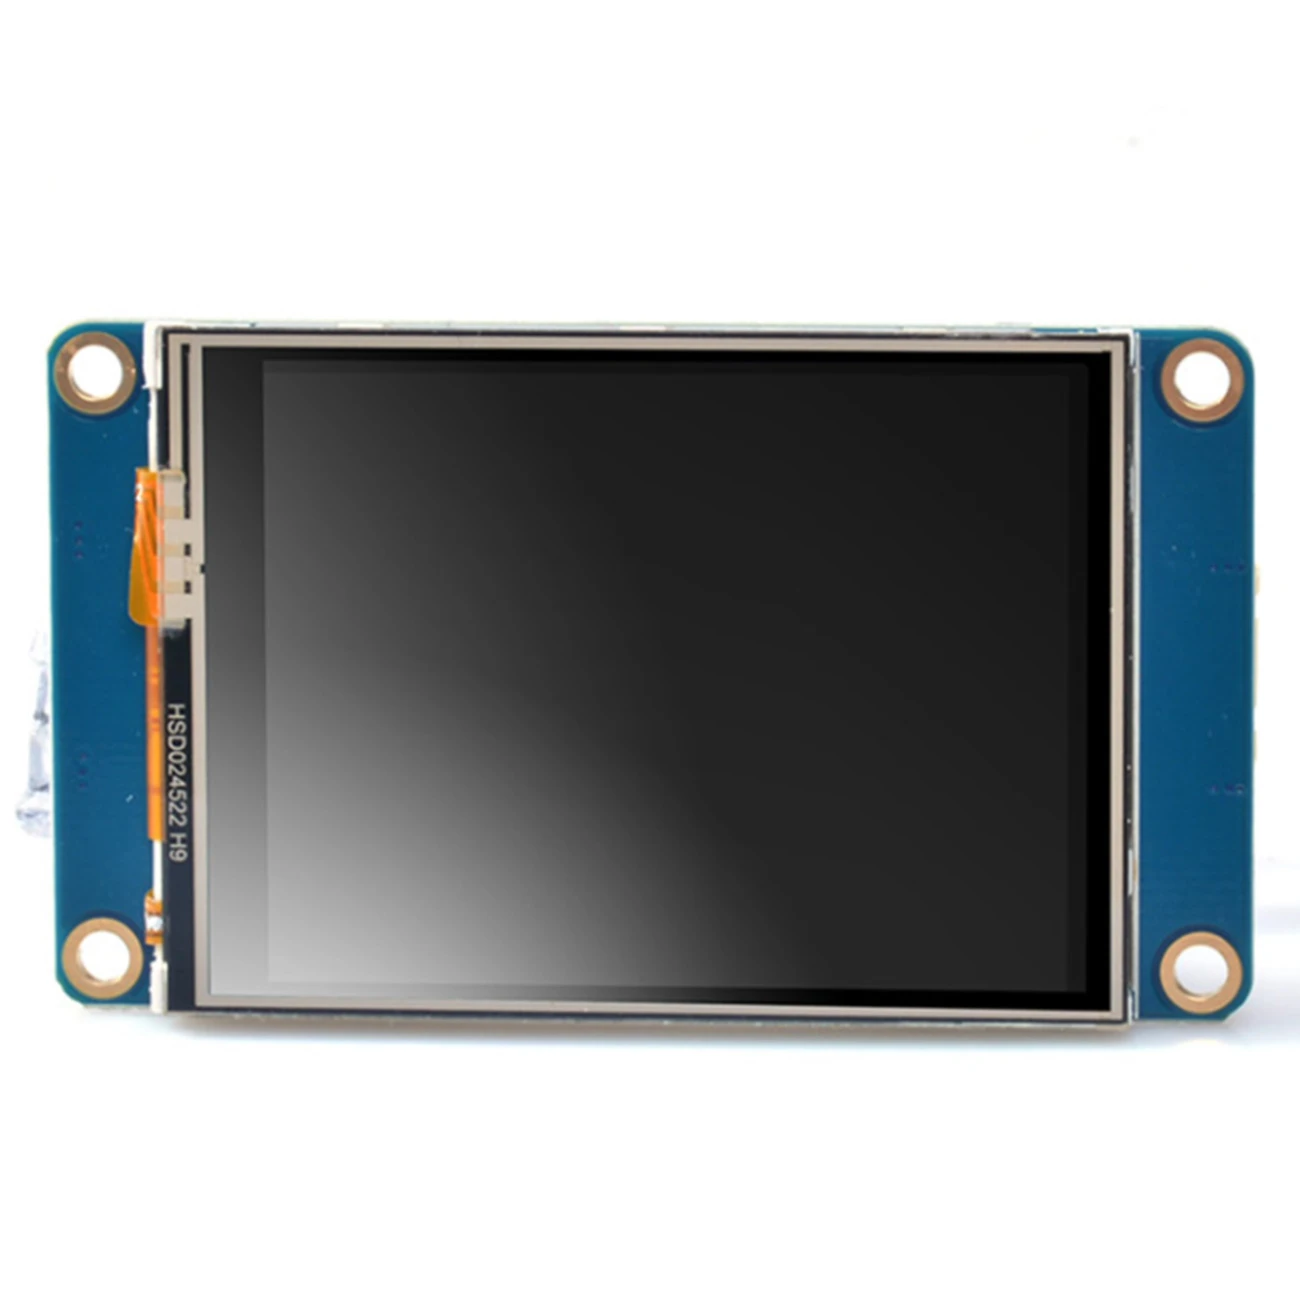 Nextion NX3224T024 2.4" HMI TFT LCD Touch Display Module Resistive Touch Screen+